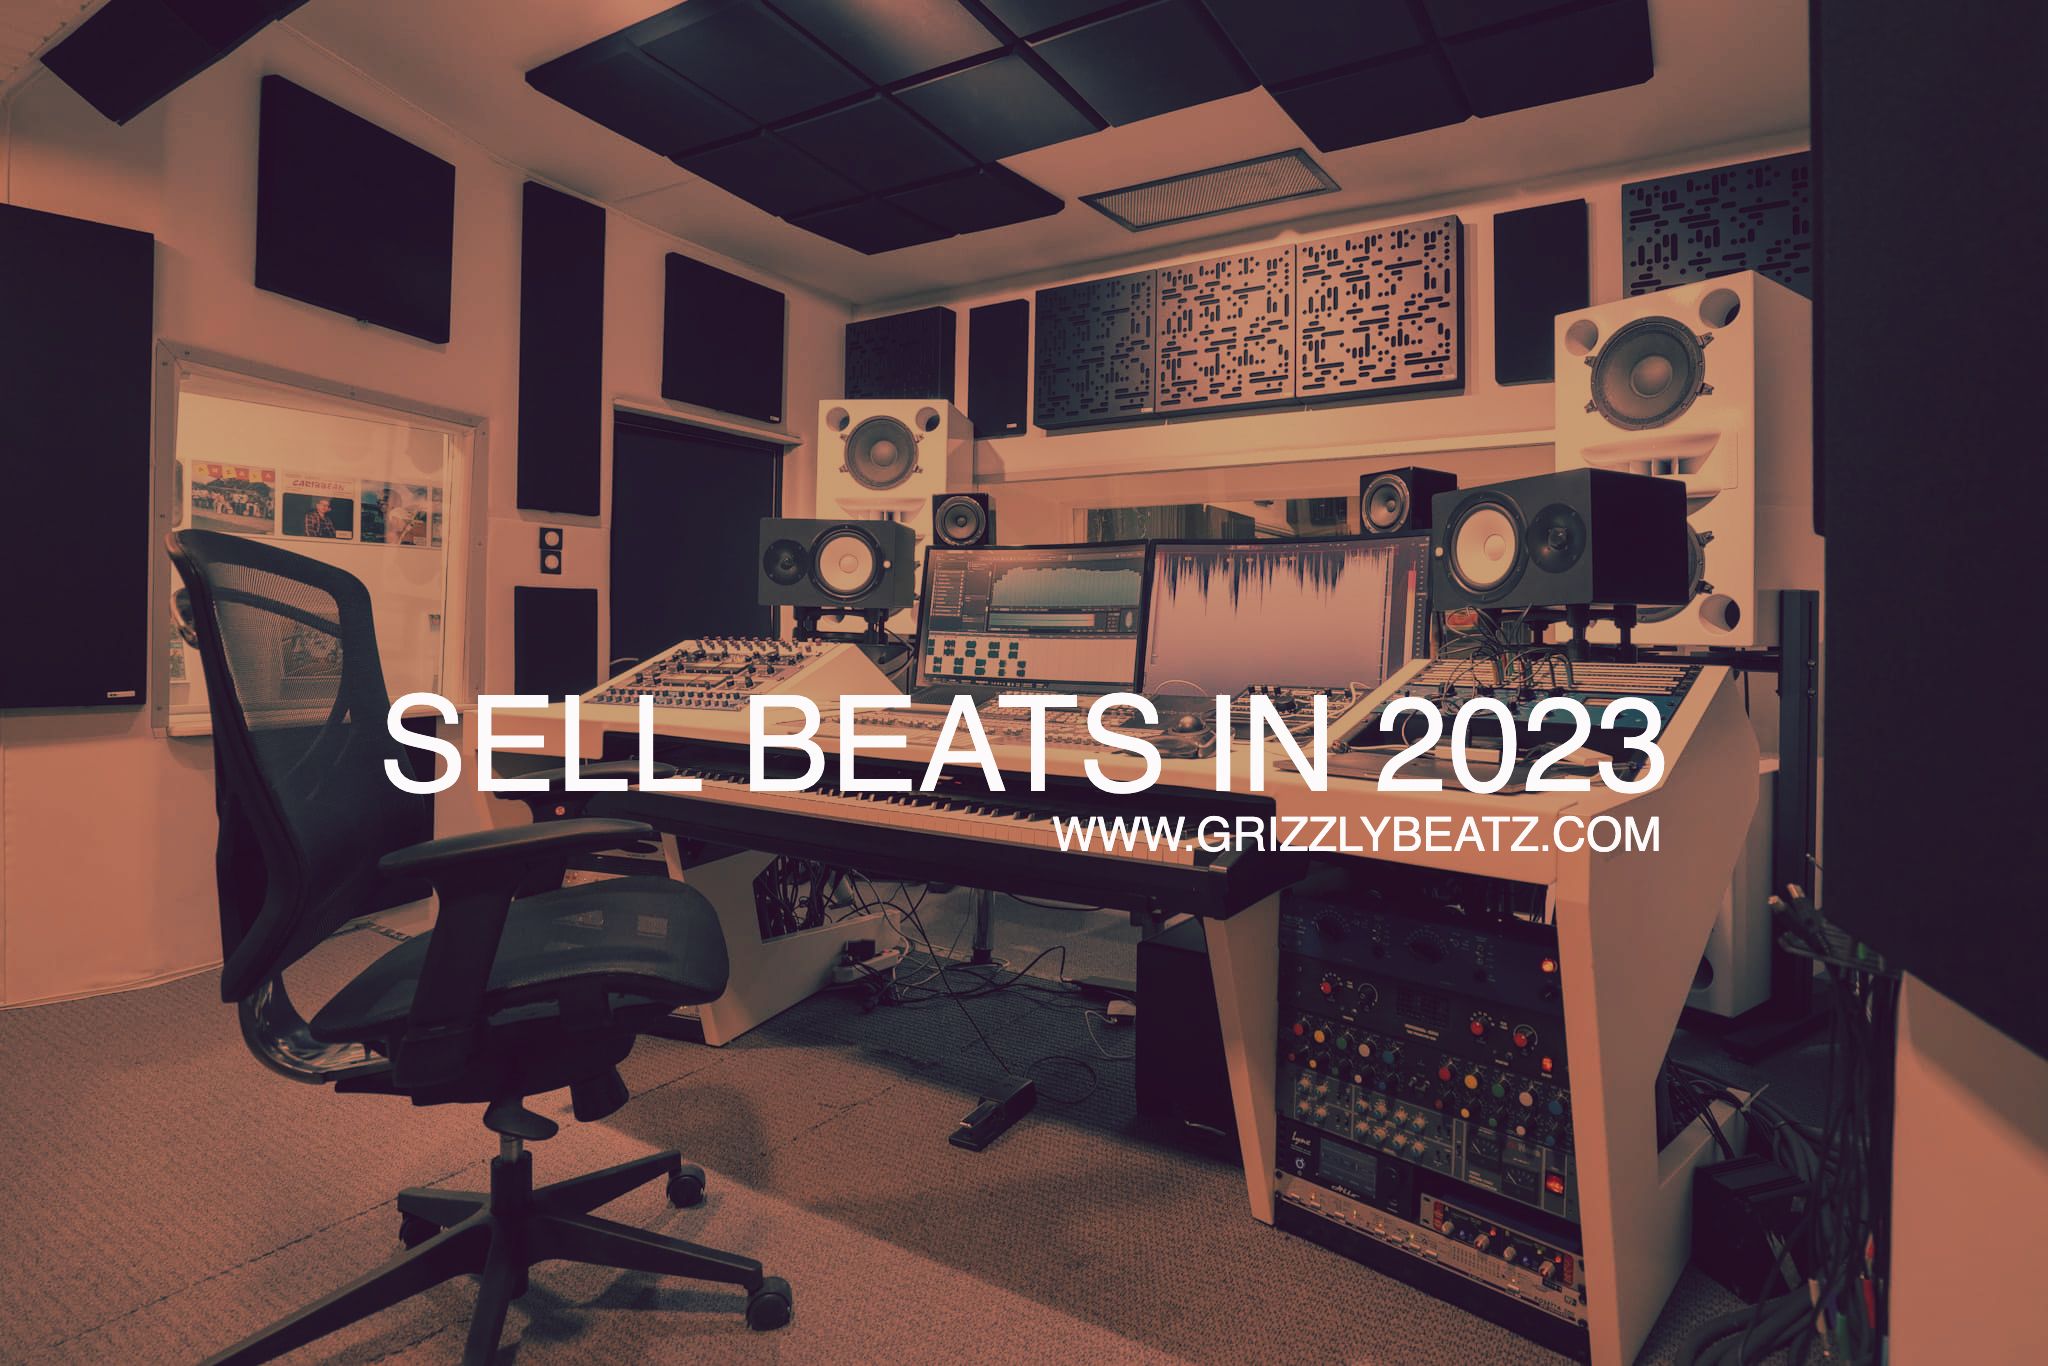 Sell Beats 2023: Comprehensive Guide to Selling Beats